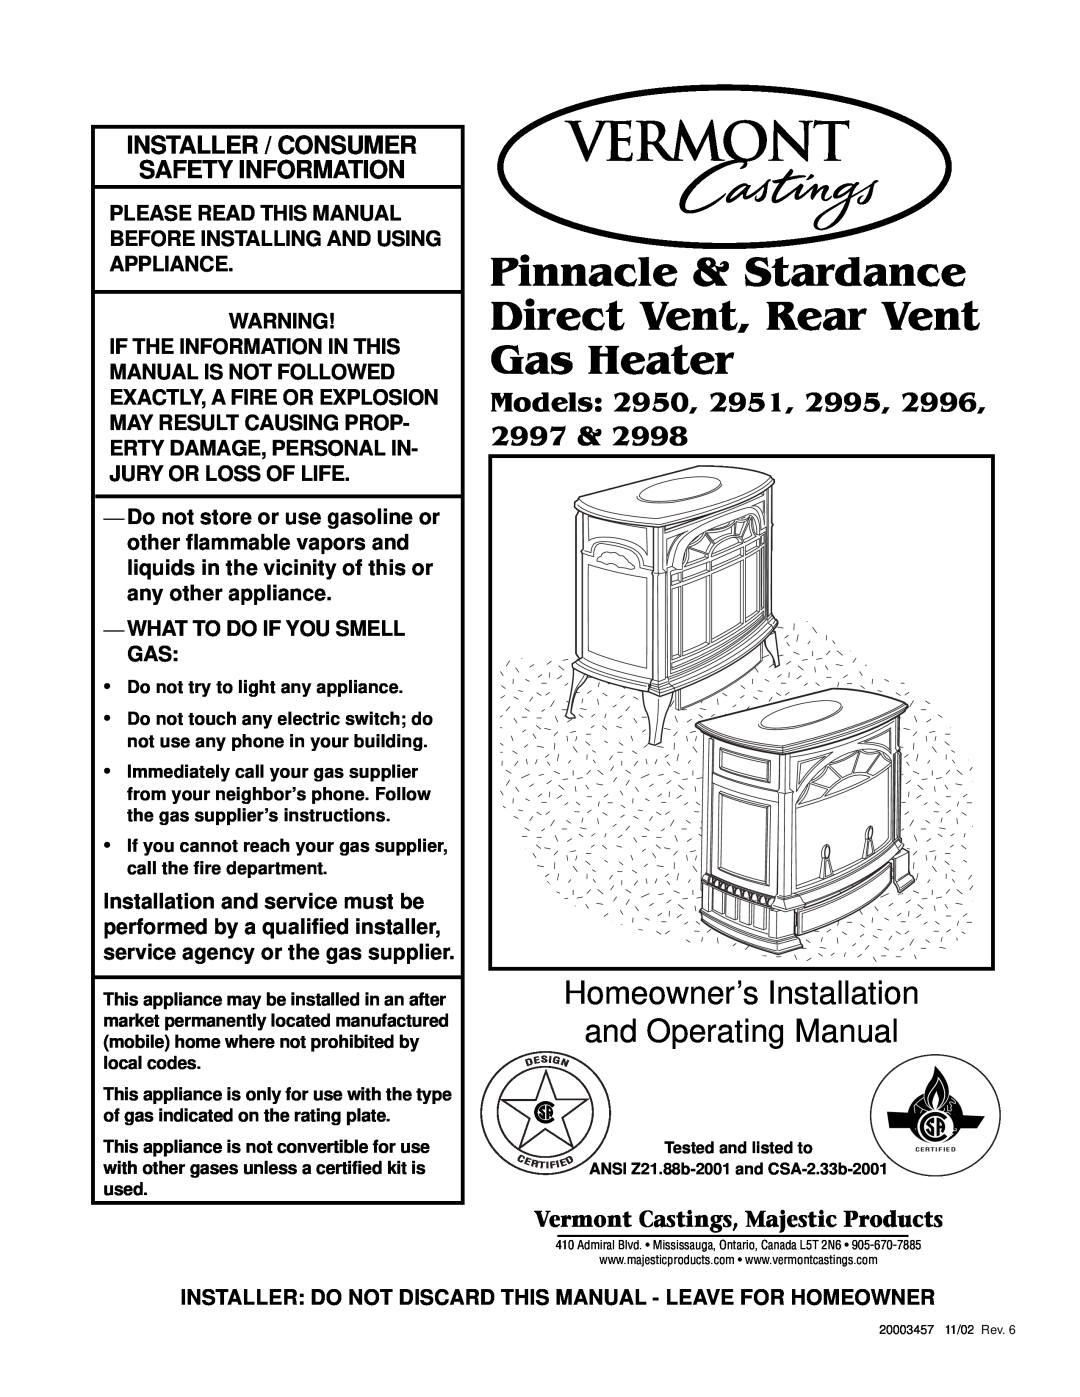 Vermont Casting 2951 manual Vermont Castings, Majestic Products, What To Do If You Smell Gas, Gas Heater, Models, 2997 